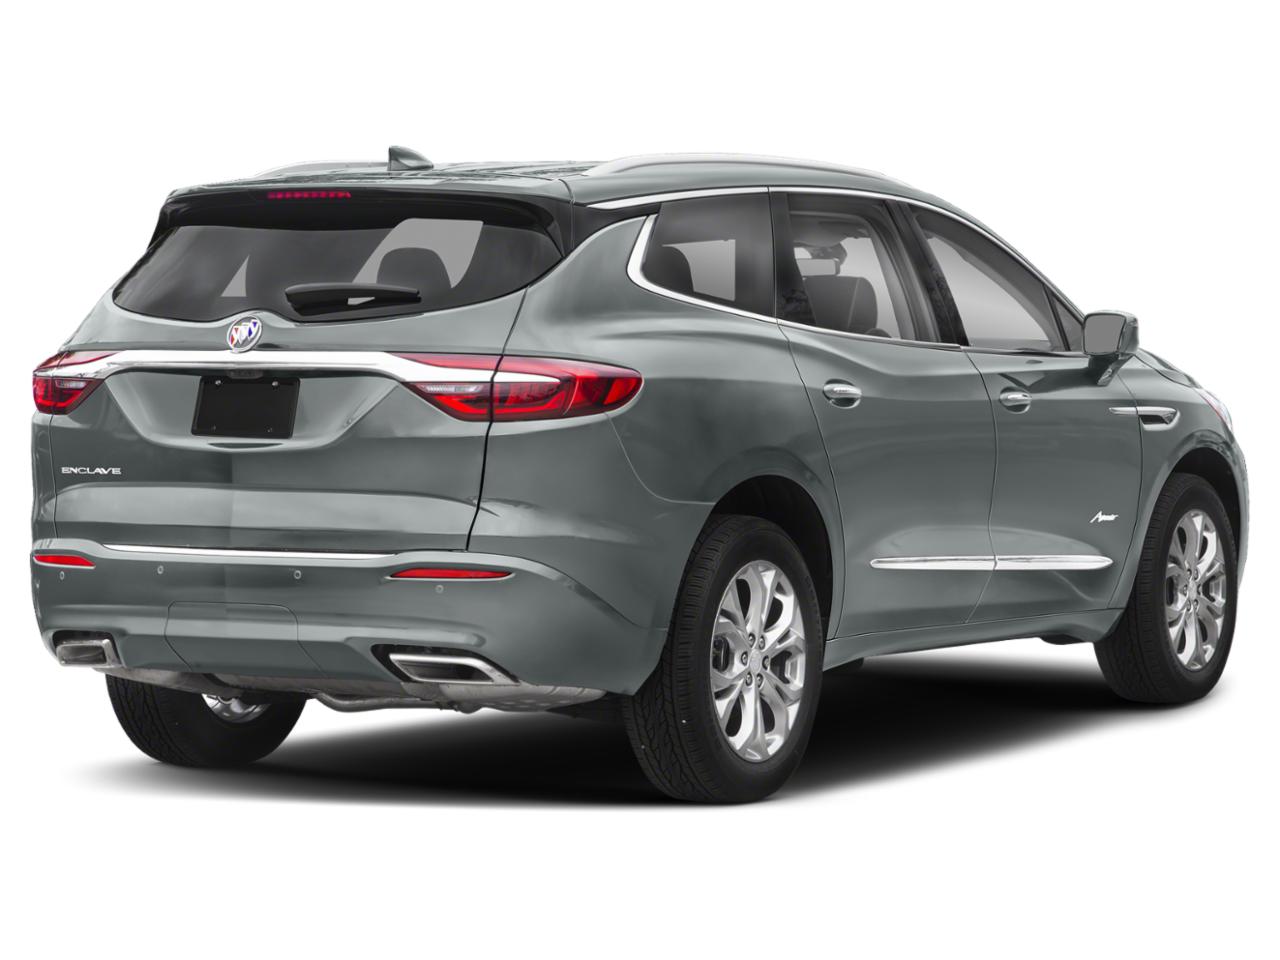 New 2021 Buick Enclave Avenir FWD in Gray for sale in RED BUD, Illinois